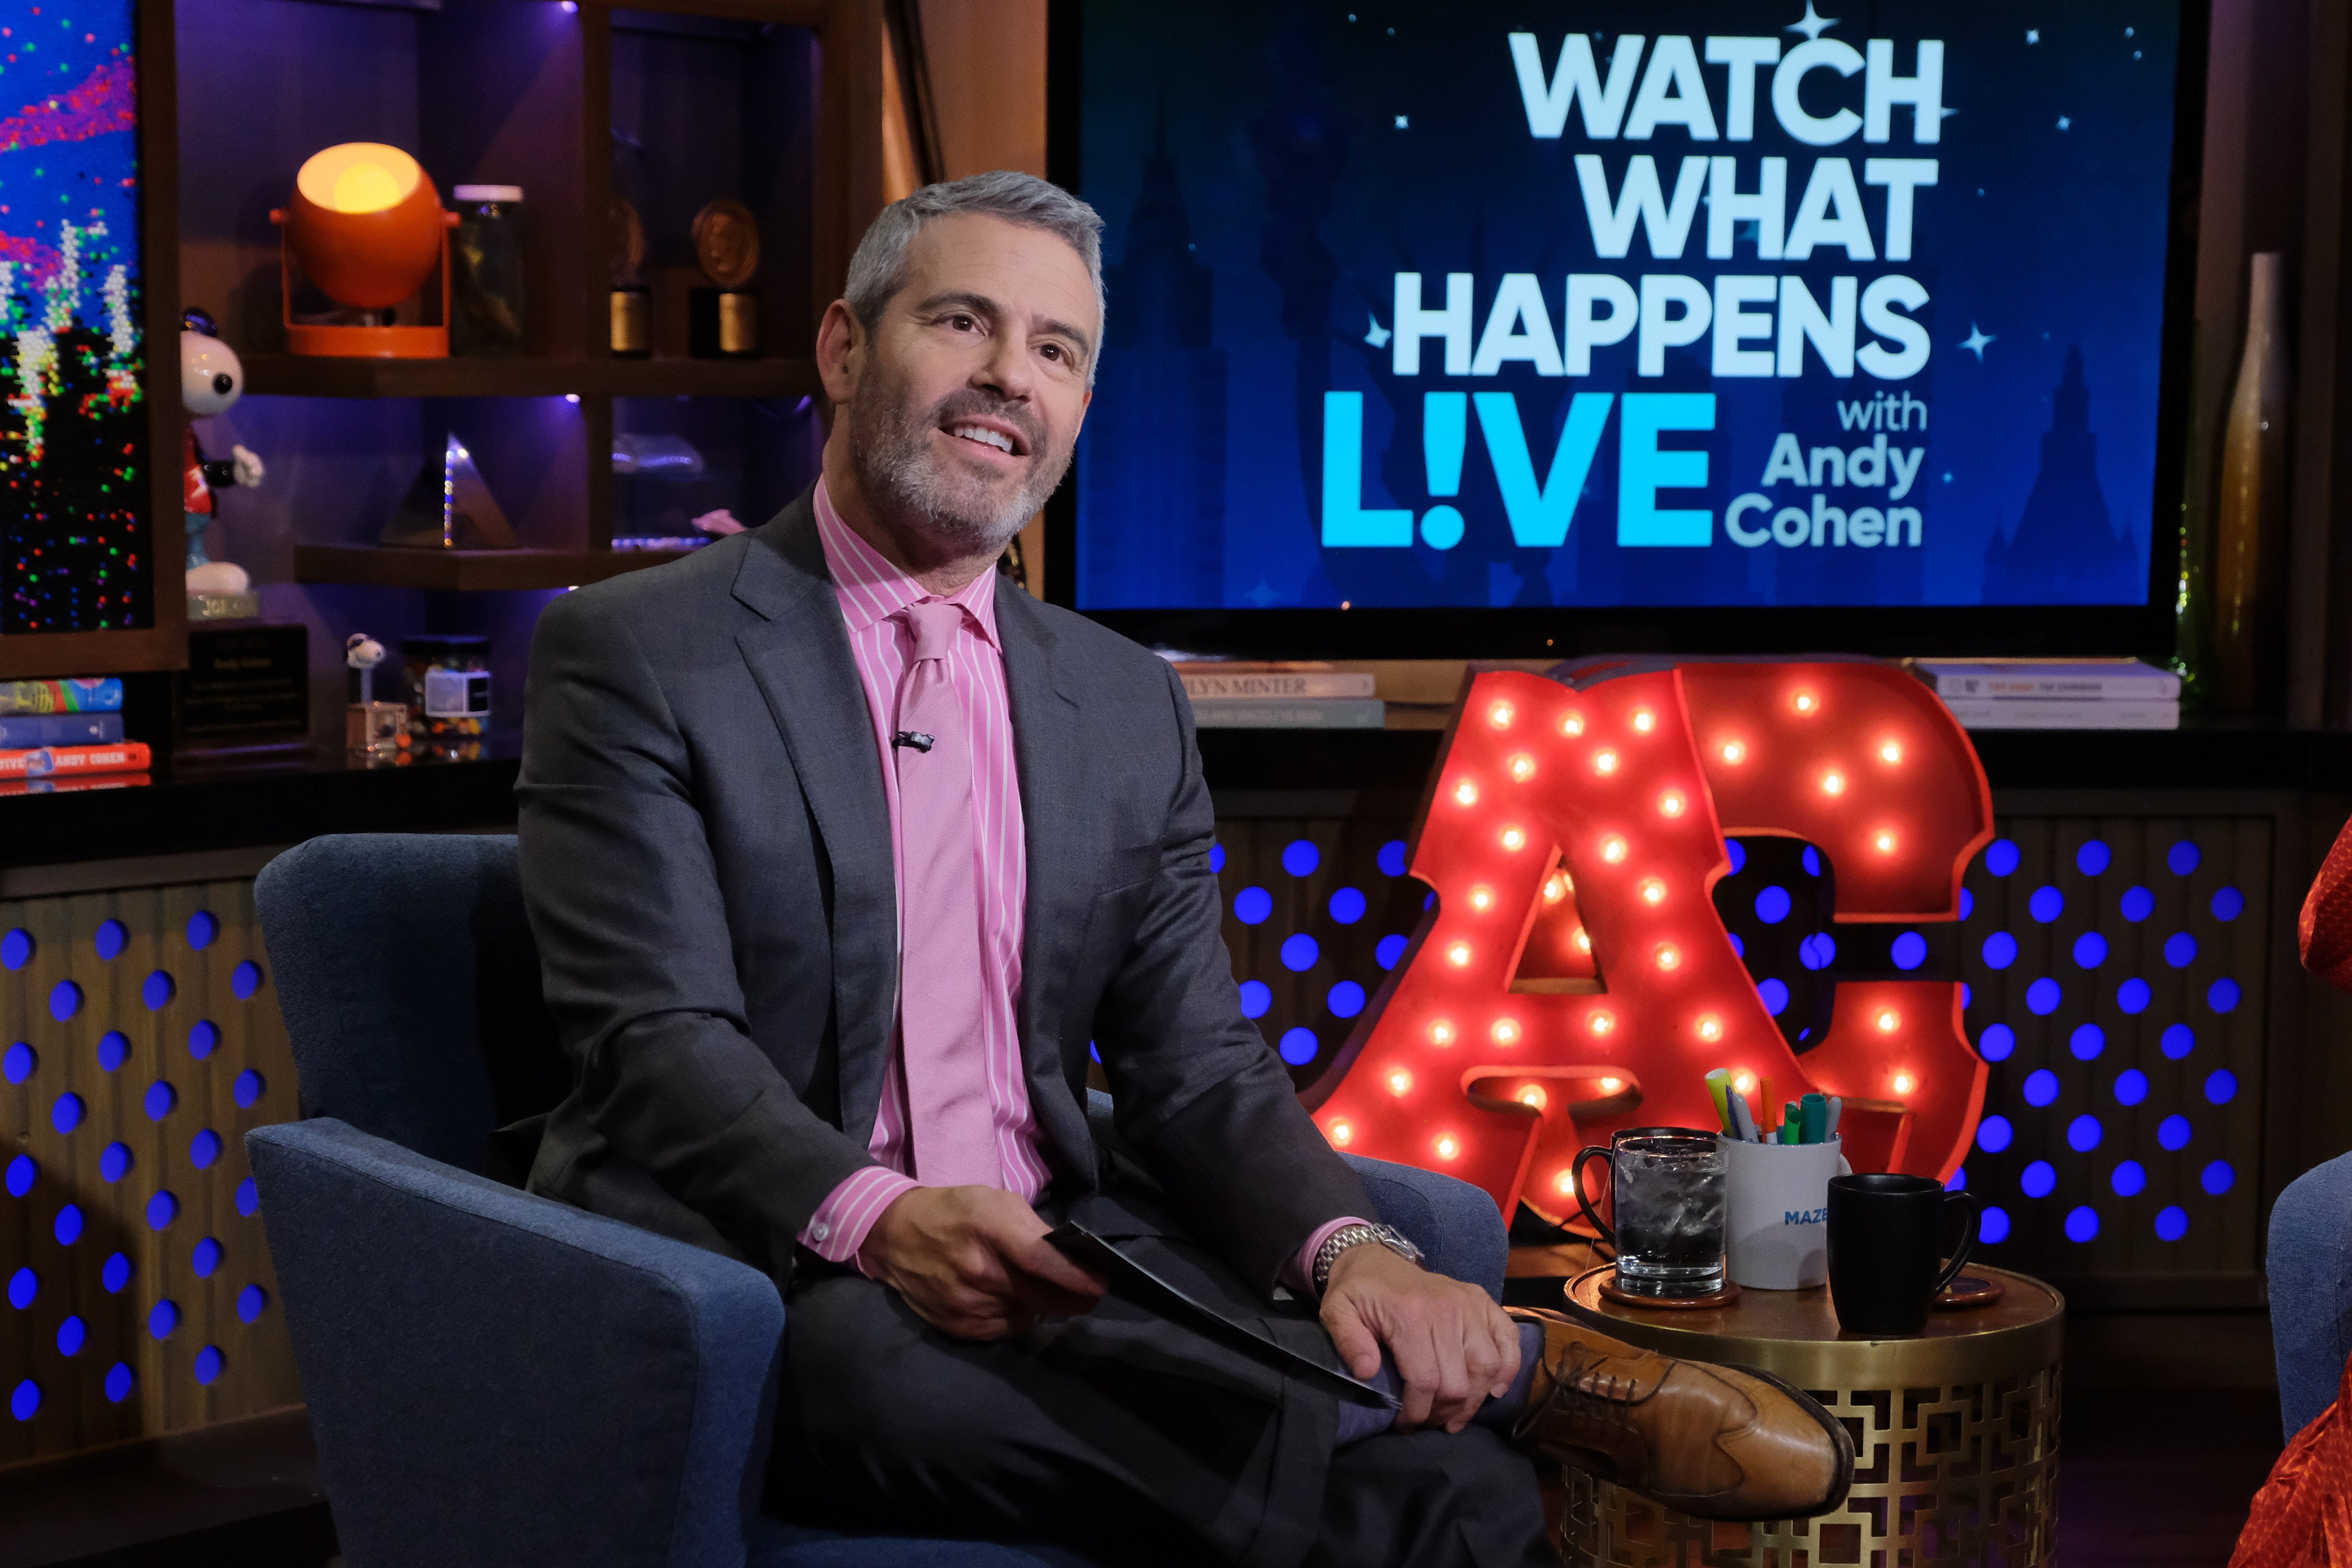 Andy Cohen on set for his show "Watch What Happens Live." | Photo: Getty Images